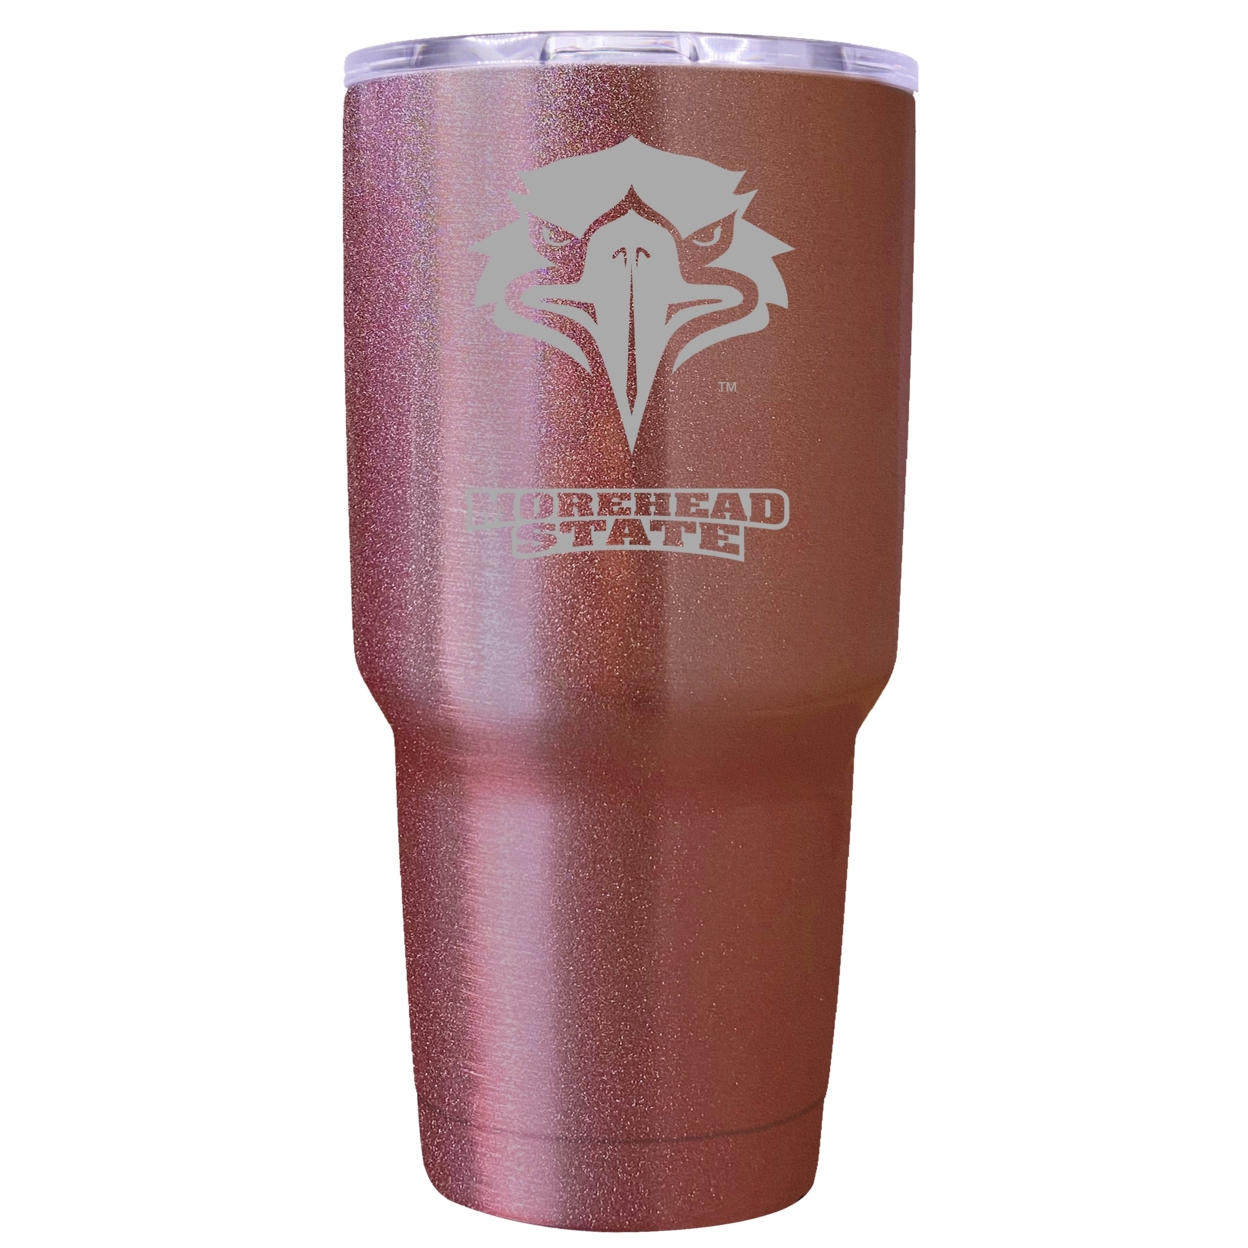 Morehead State University 24 Oz Insulated Tumbler Etched - Rose Gold